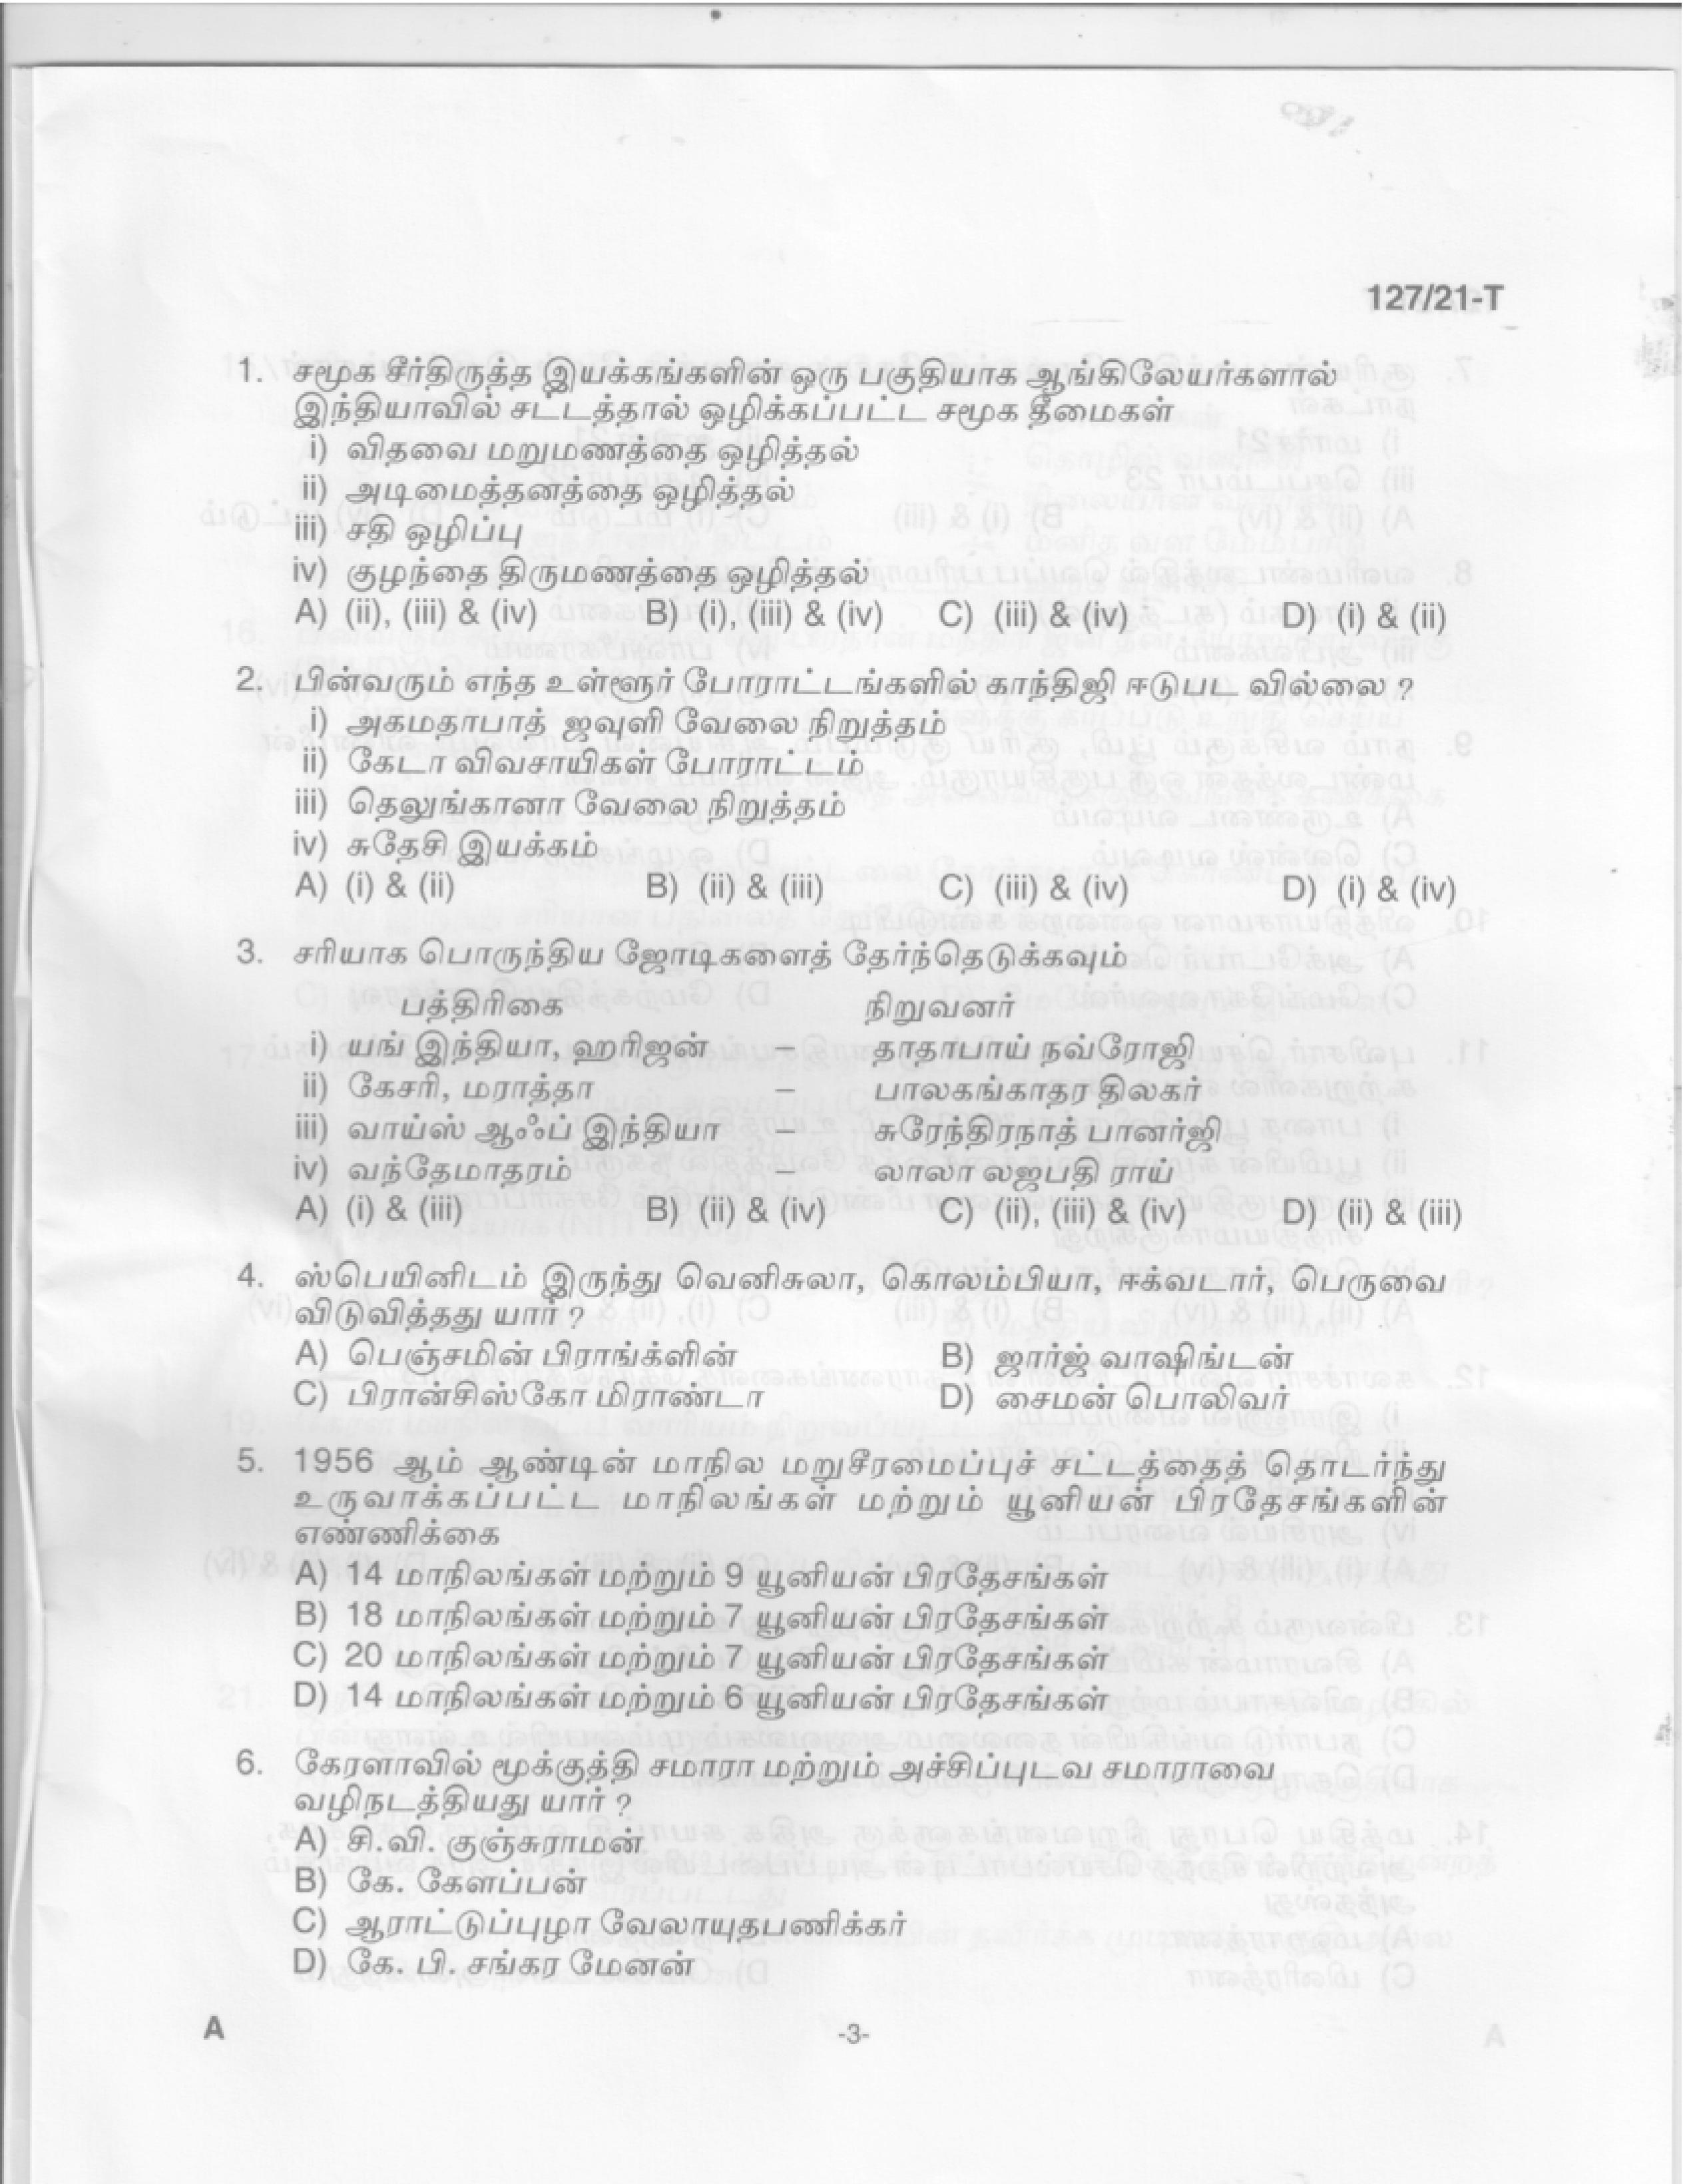 Office Attendant and Laboratory Attender Tamil Exam 2021 Code 1272021 1